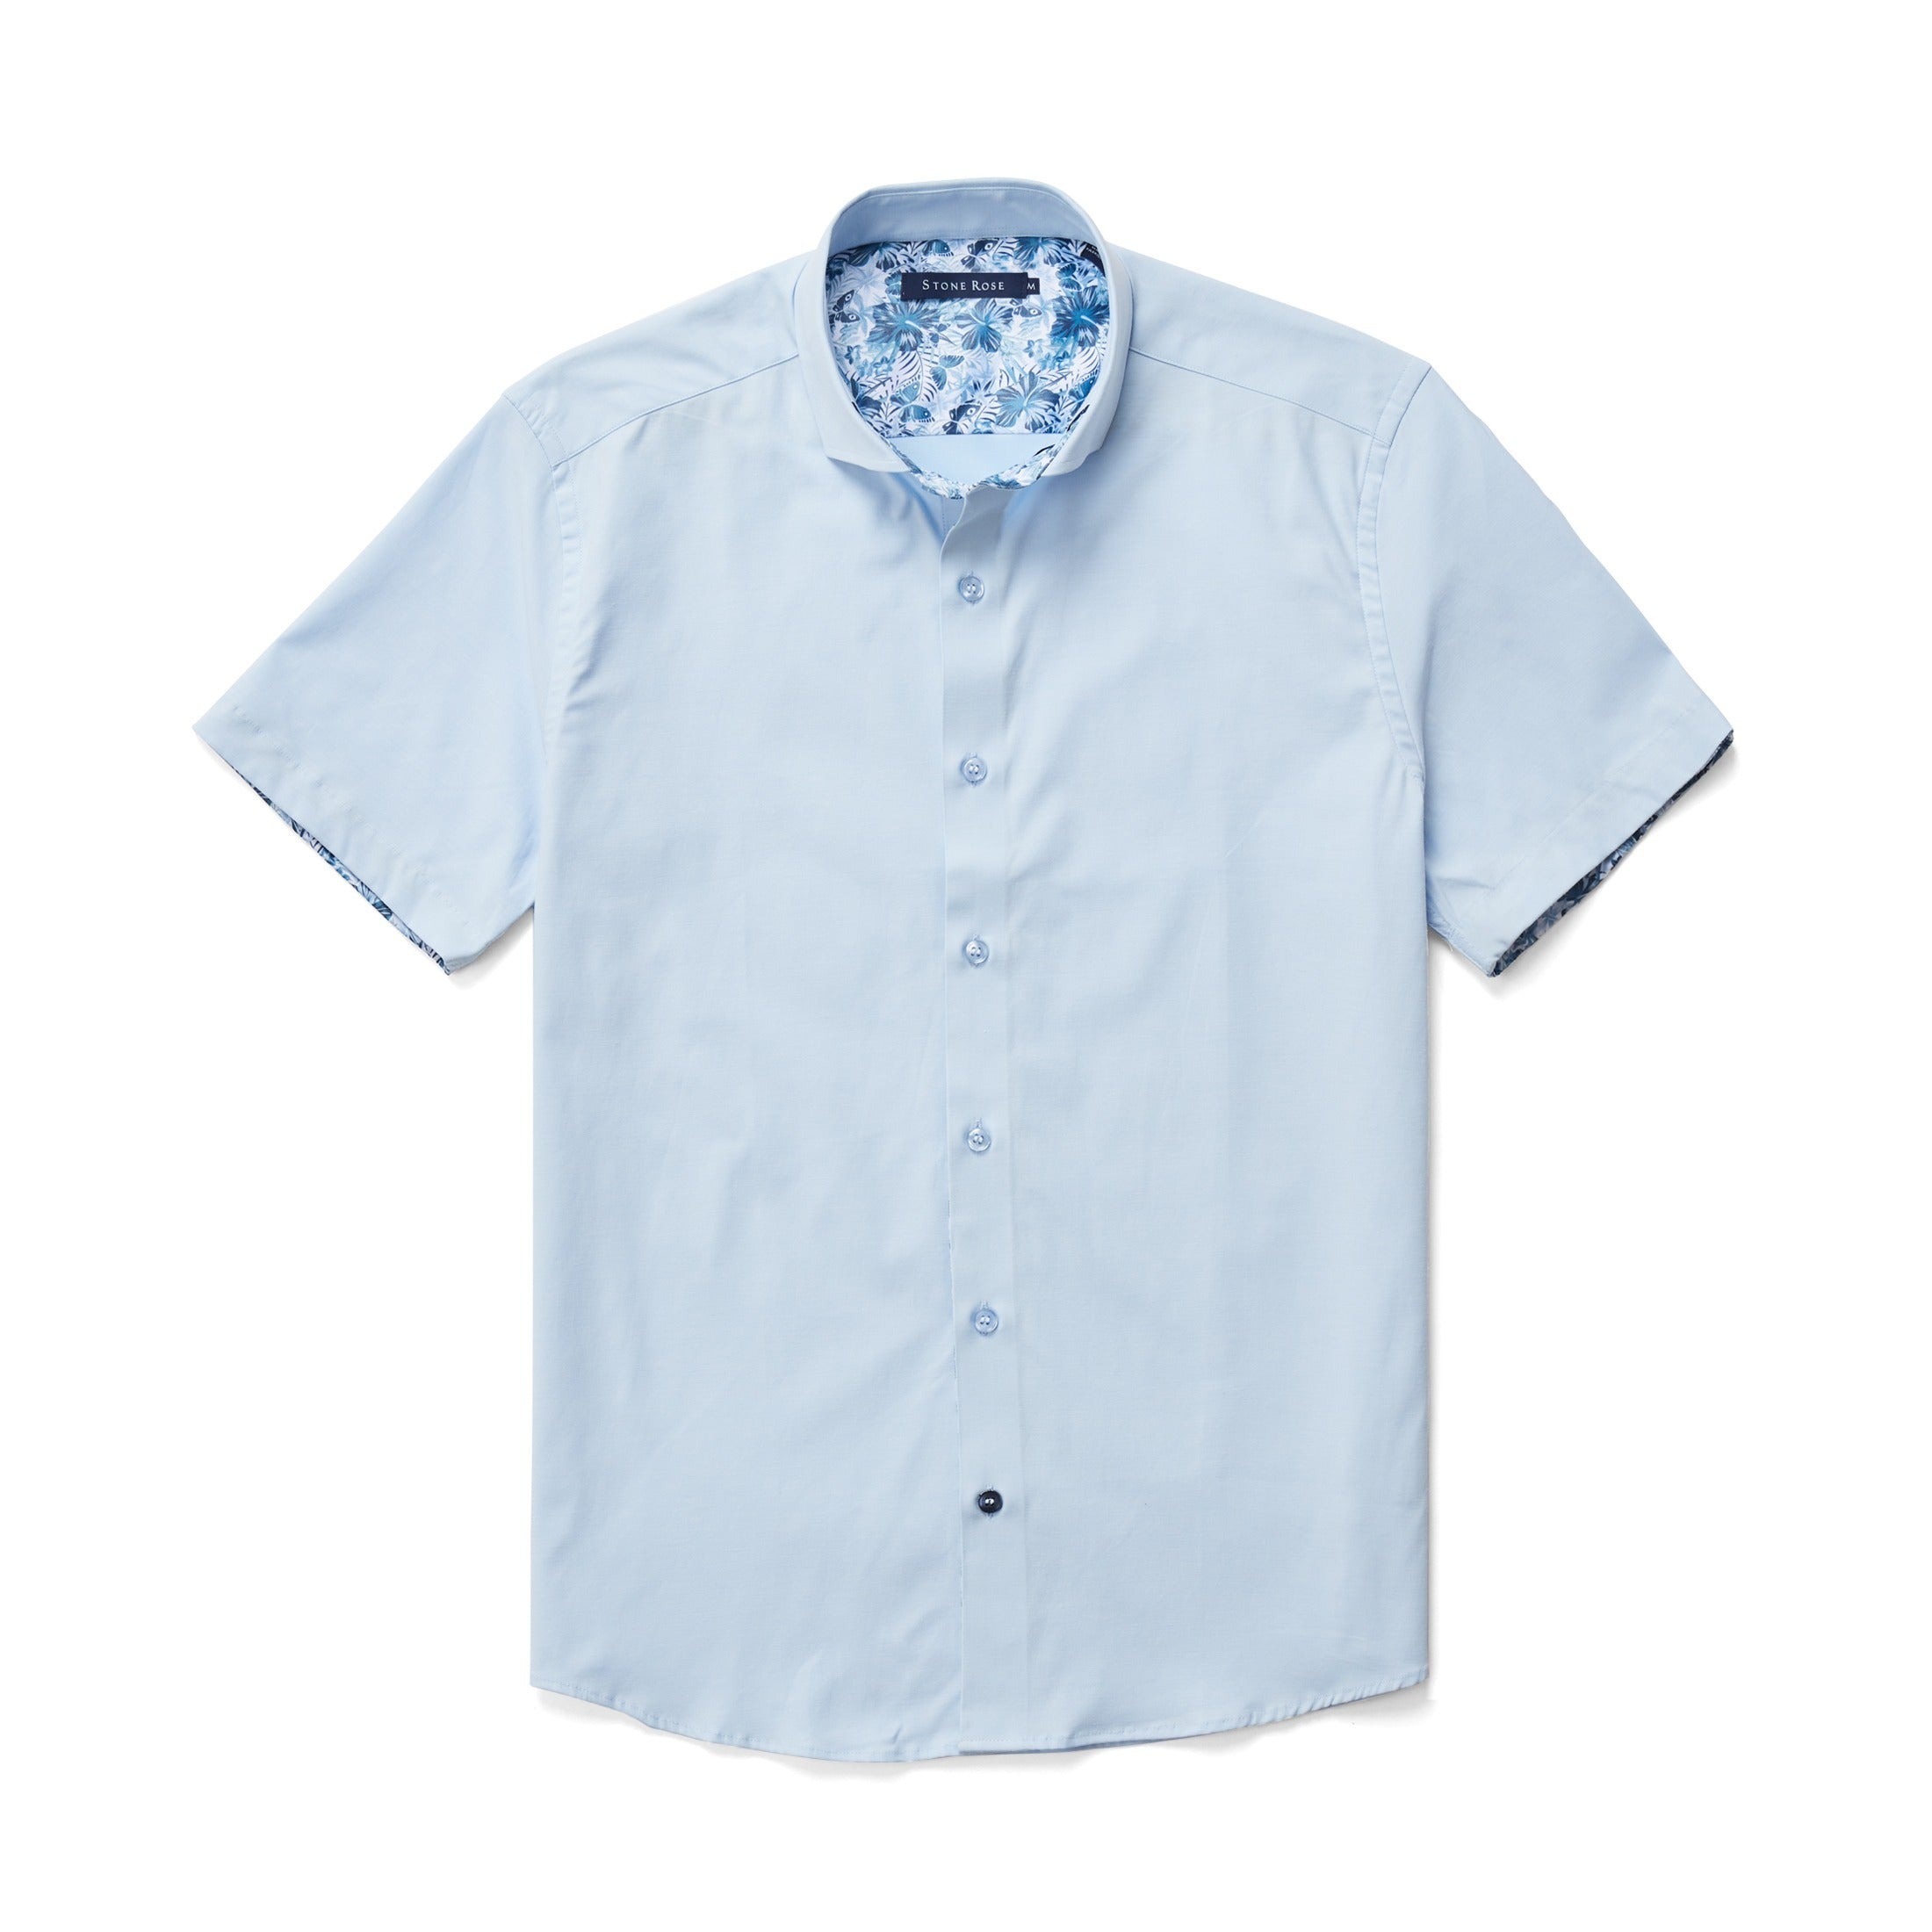 Short Sleeve Button Up Shirts - Find Your Perfect Shirt Today | Stone Rose